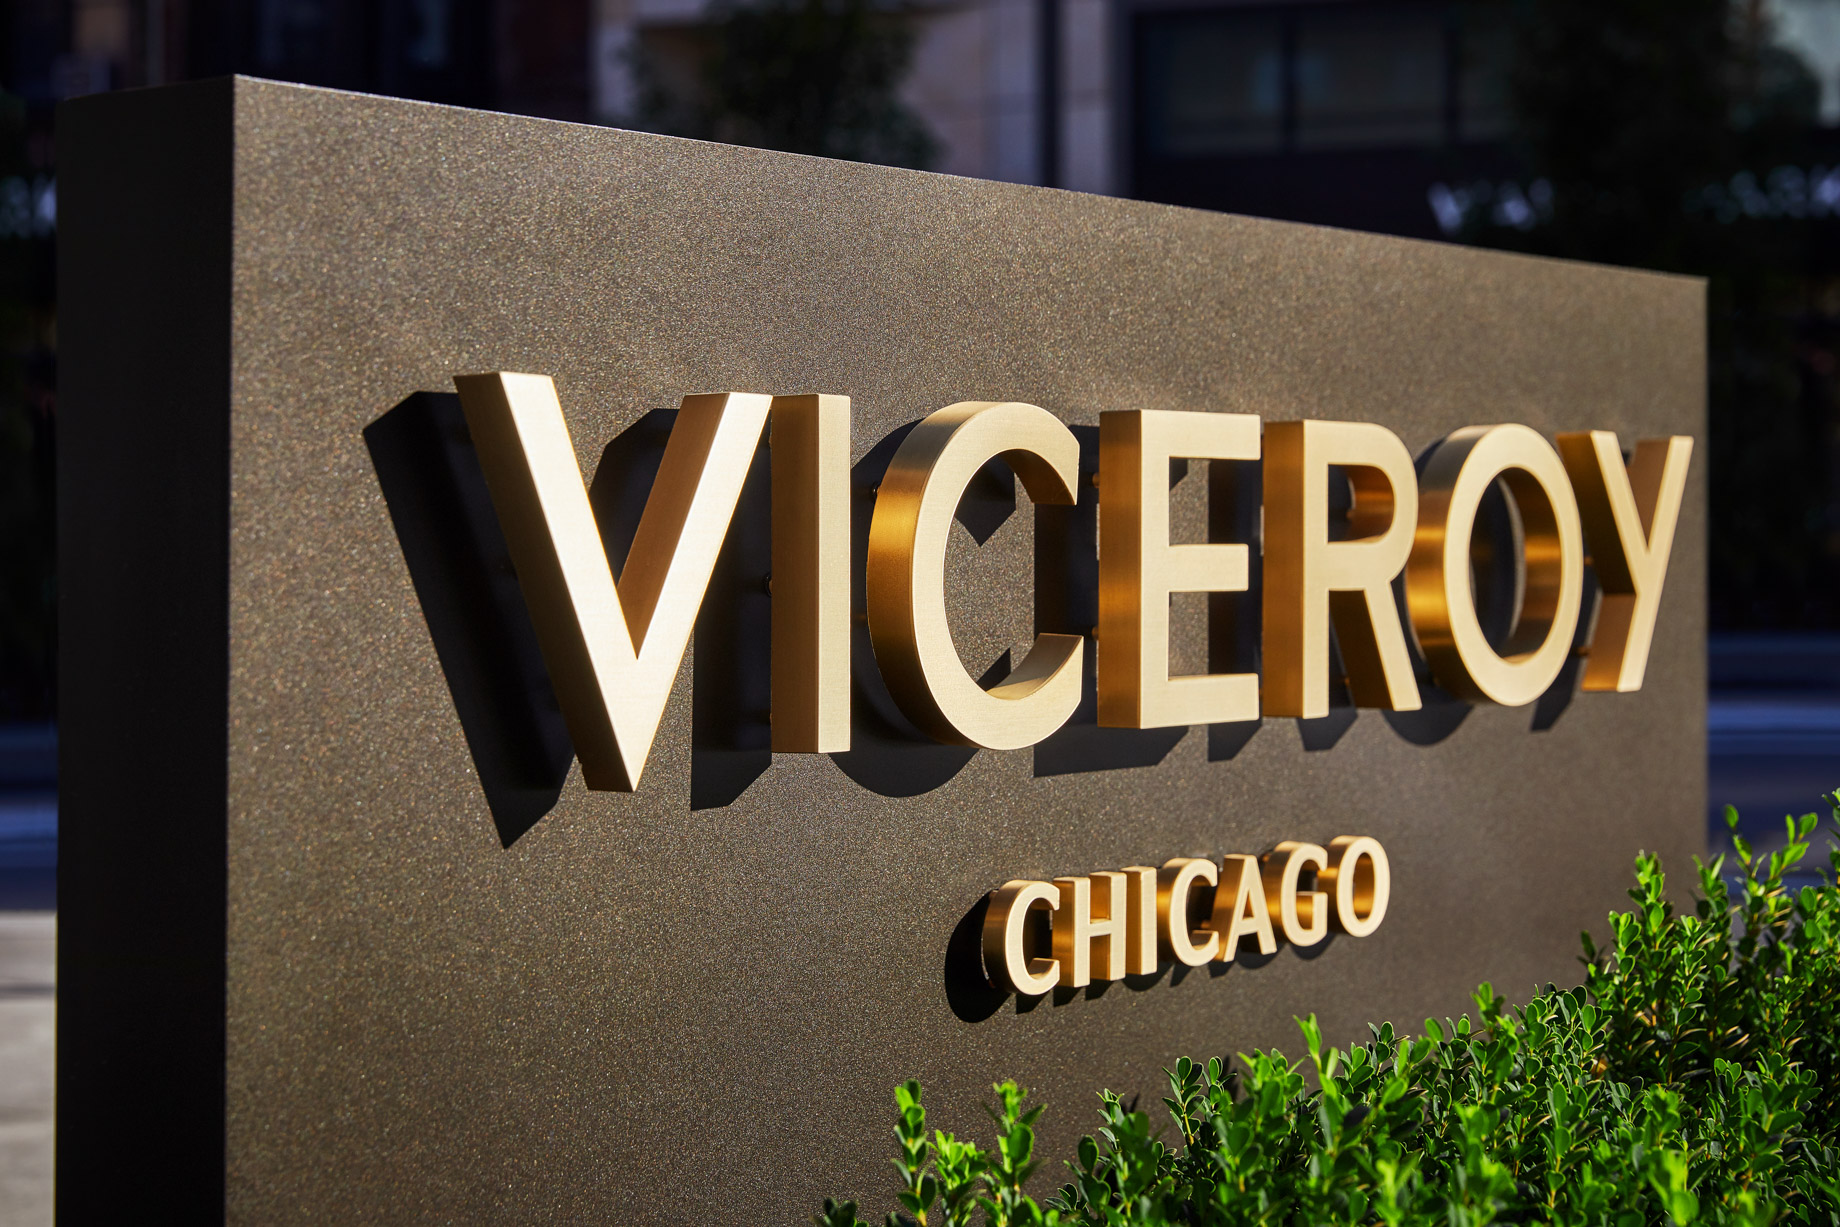 Viceroy Chicago Hotel - Chicago, IL, USA - Sign